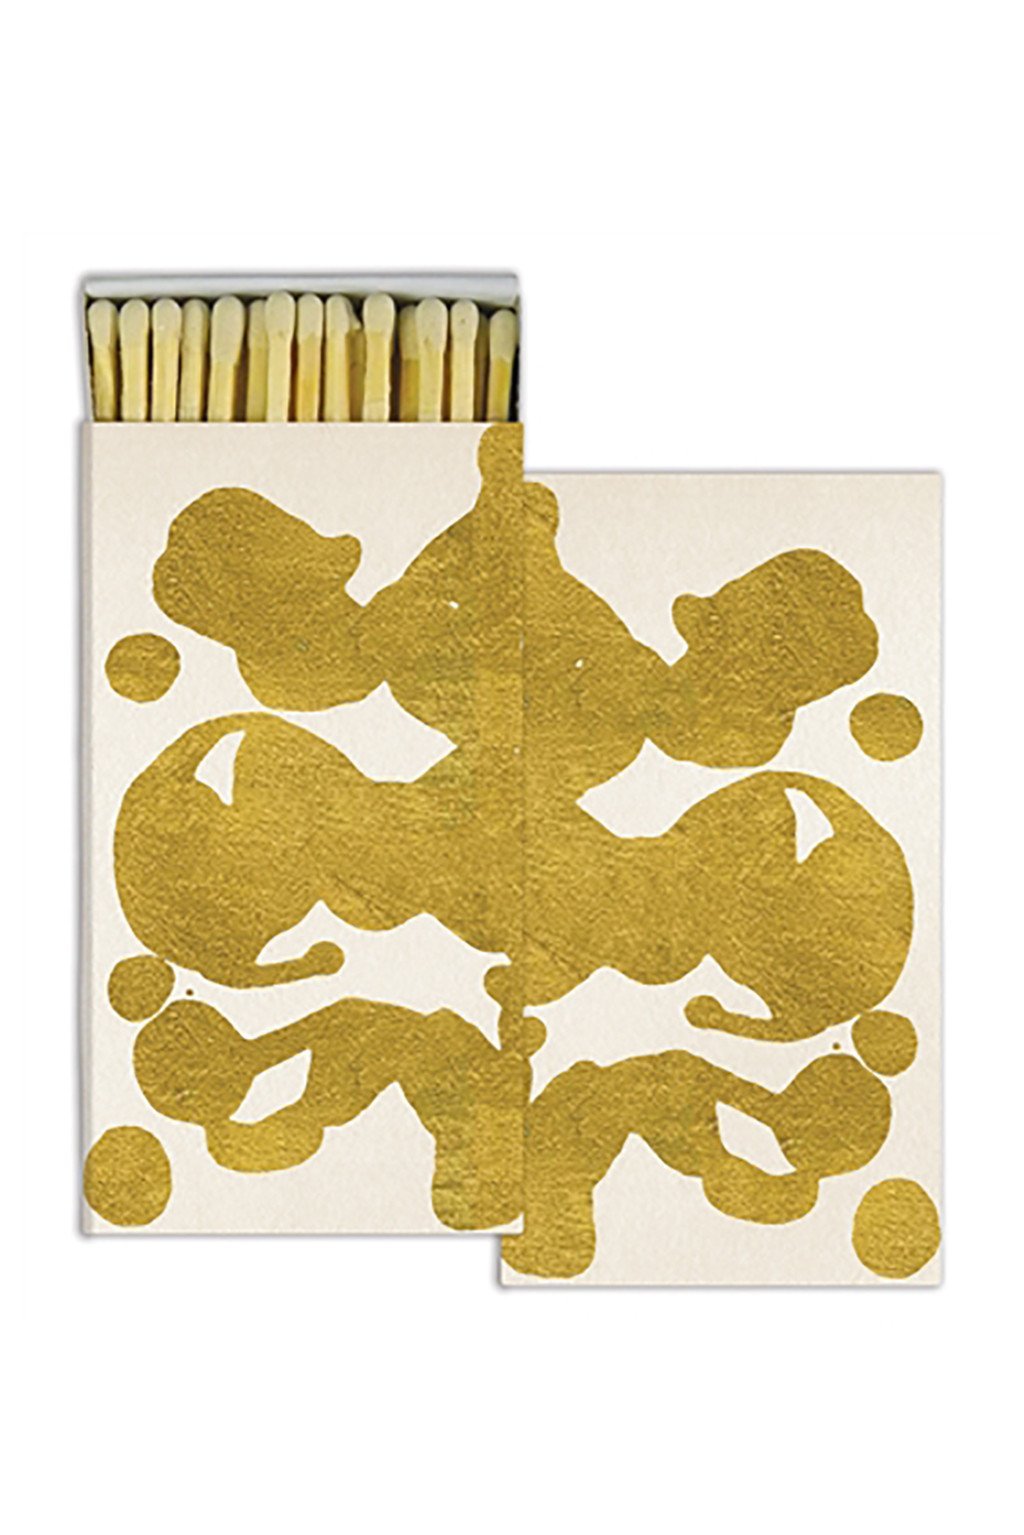 Gold Foil Rorschach Matches - Two Penny Blue